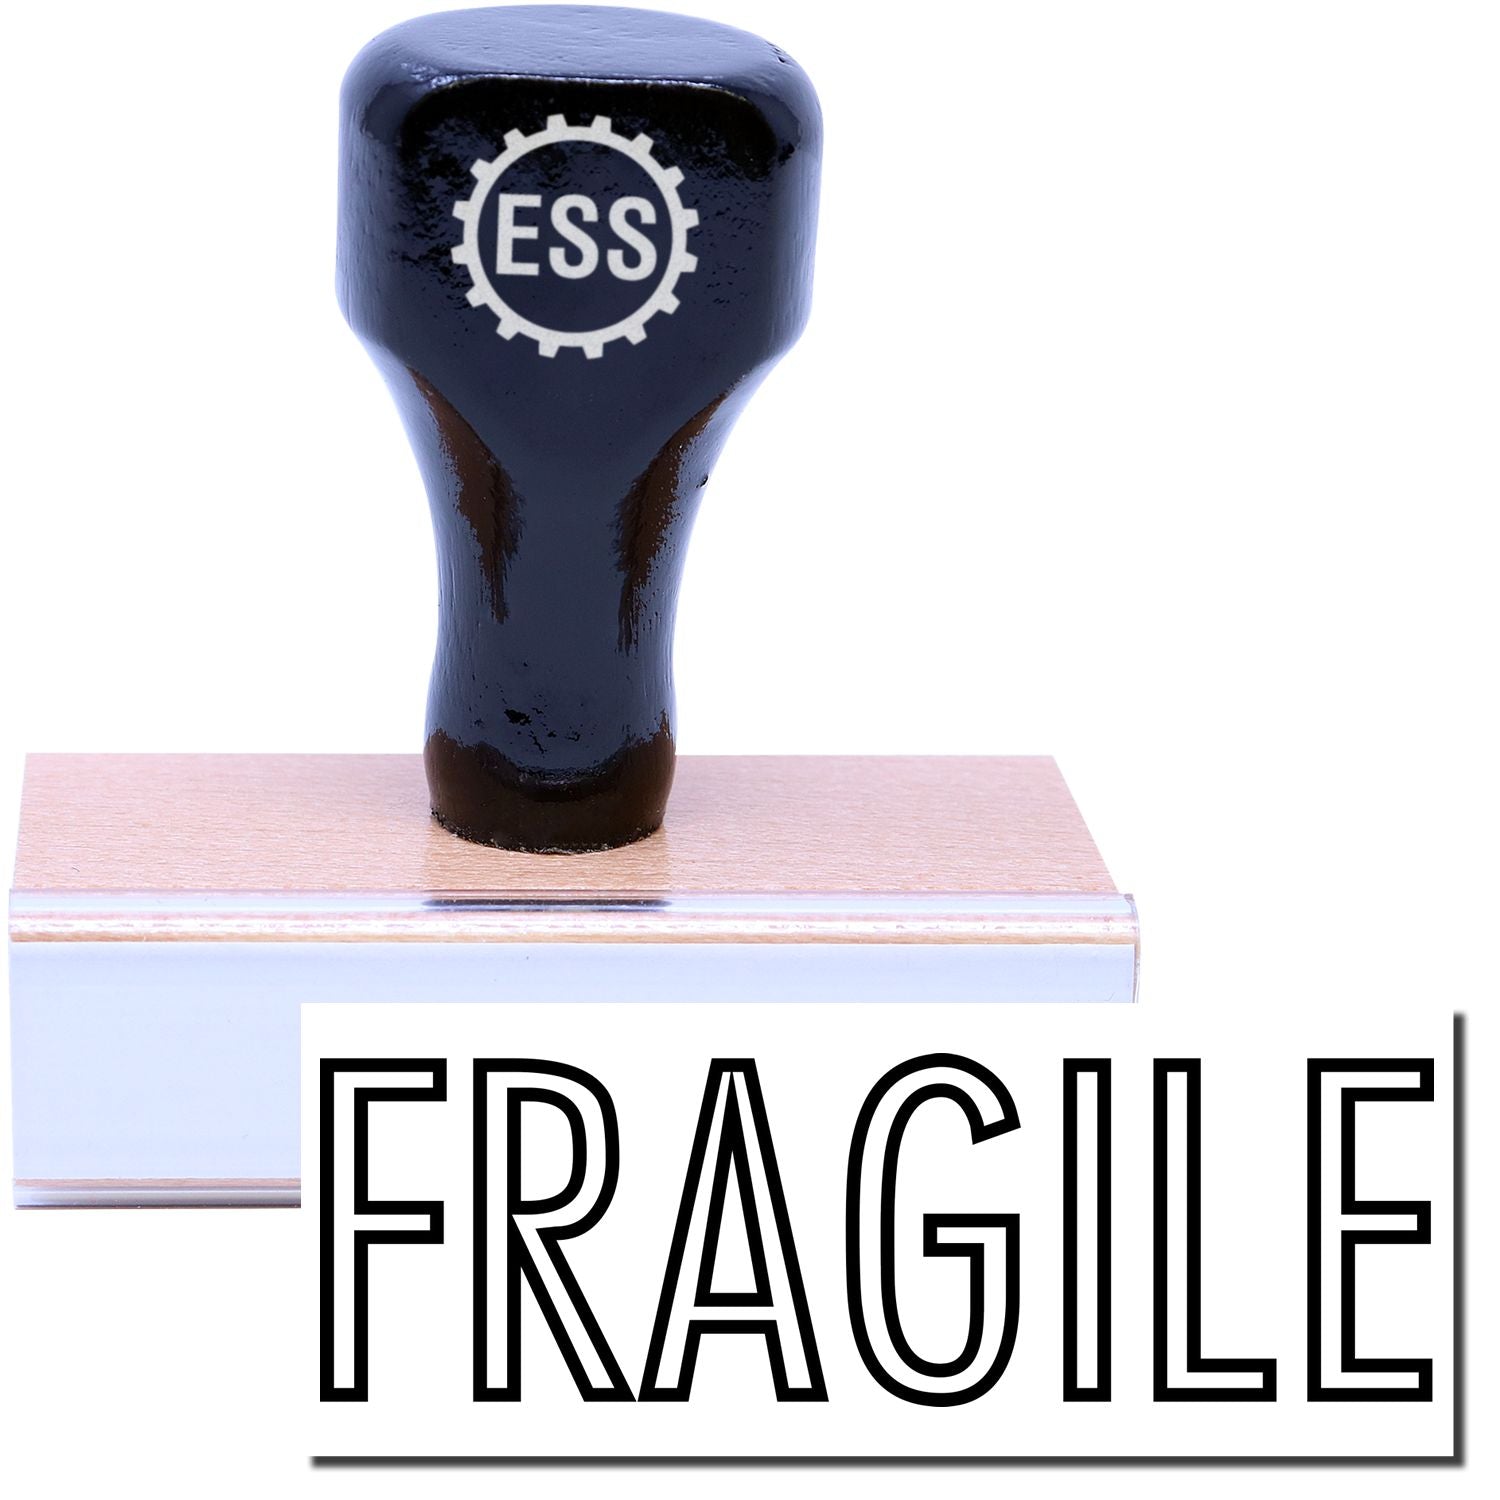 A stock office rubber stamp with a stamped image showing how the text "FRAGILE" in an outline font is displayed after stamping.